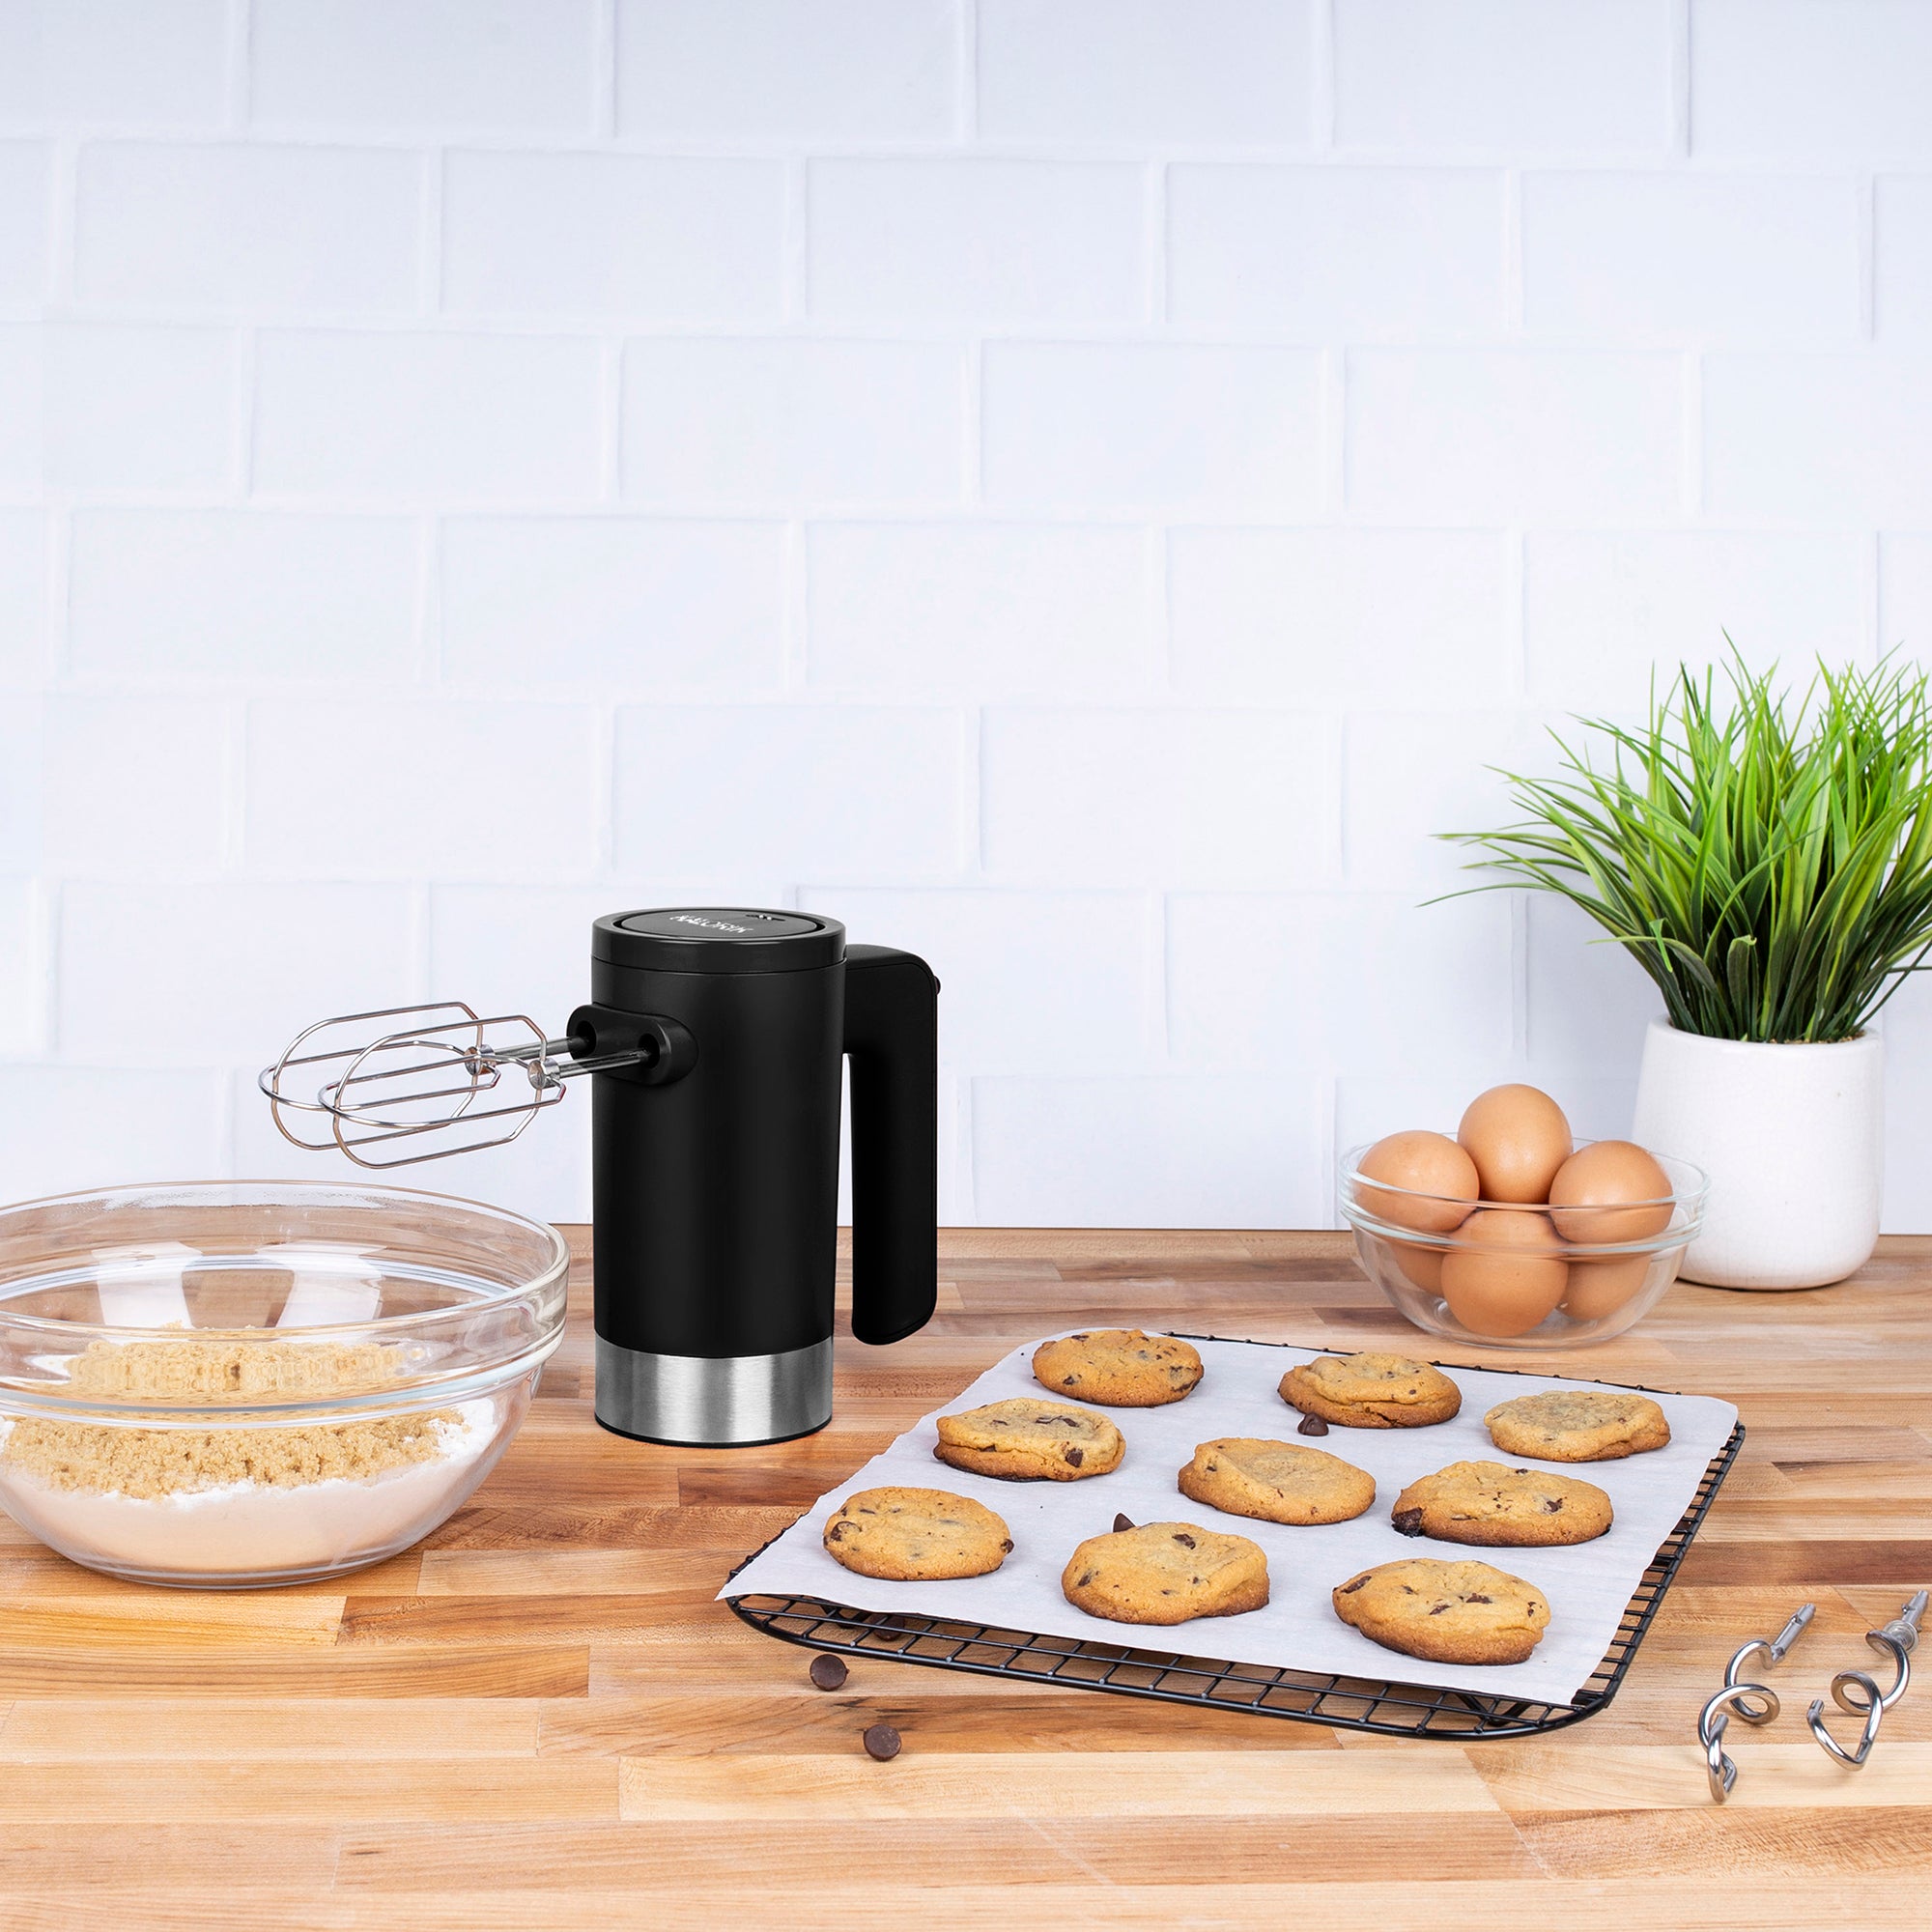 Making cookies the easy way with OXO Good Grips Non-stick Pro